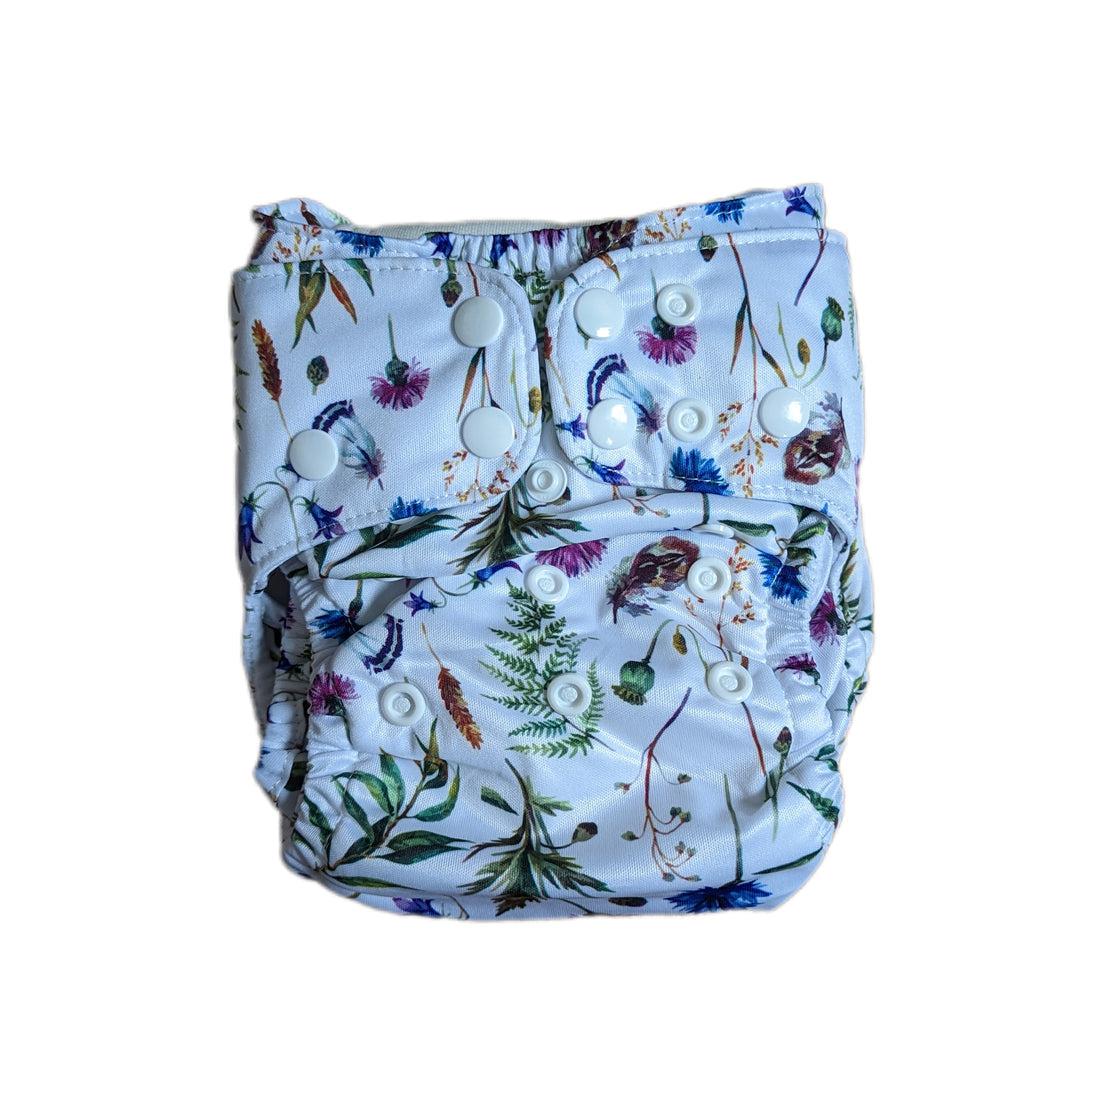 Mimi & Co Originals 1.0 Snap in Two Pocket Nappy-Snap in with Pocket-Mimi & Co-Blossom-The Nappy Market